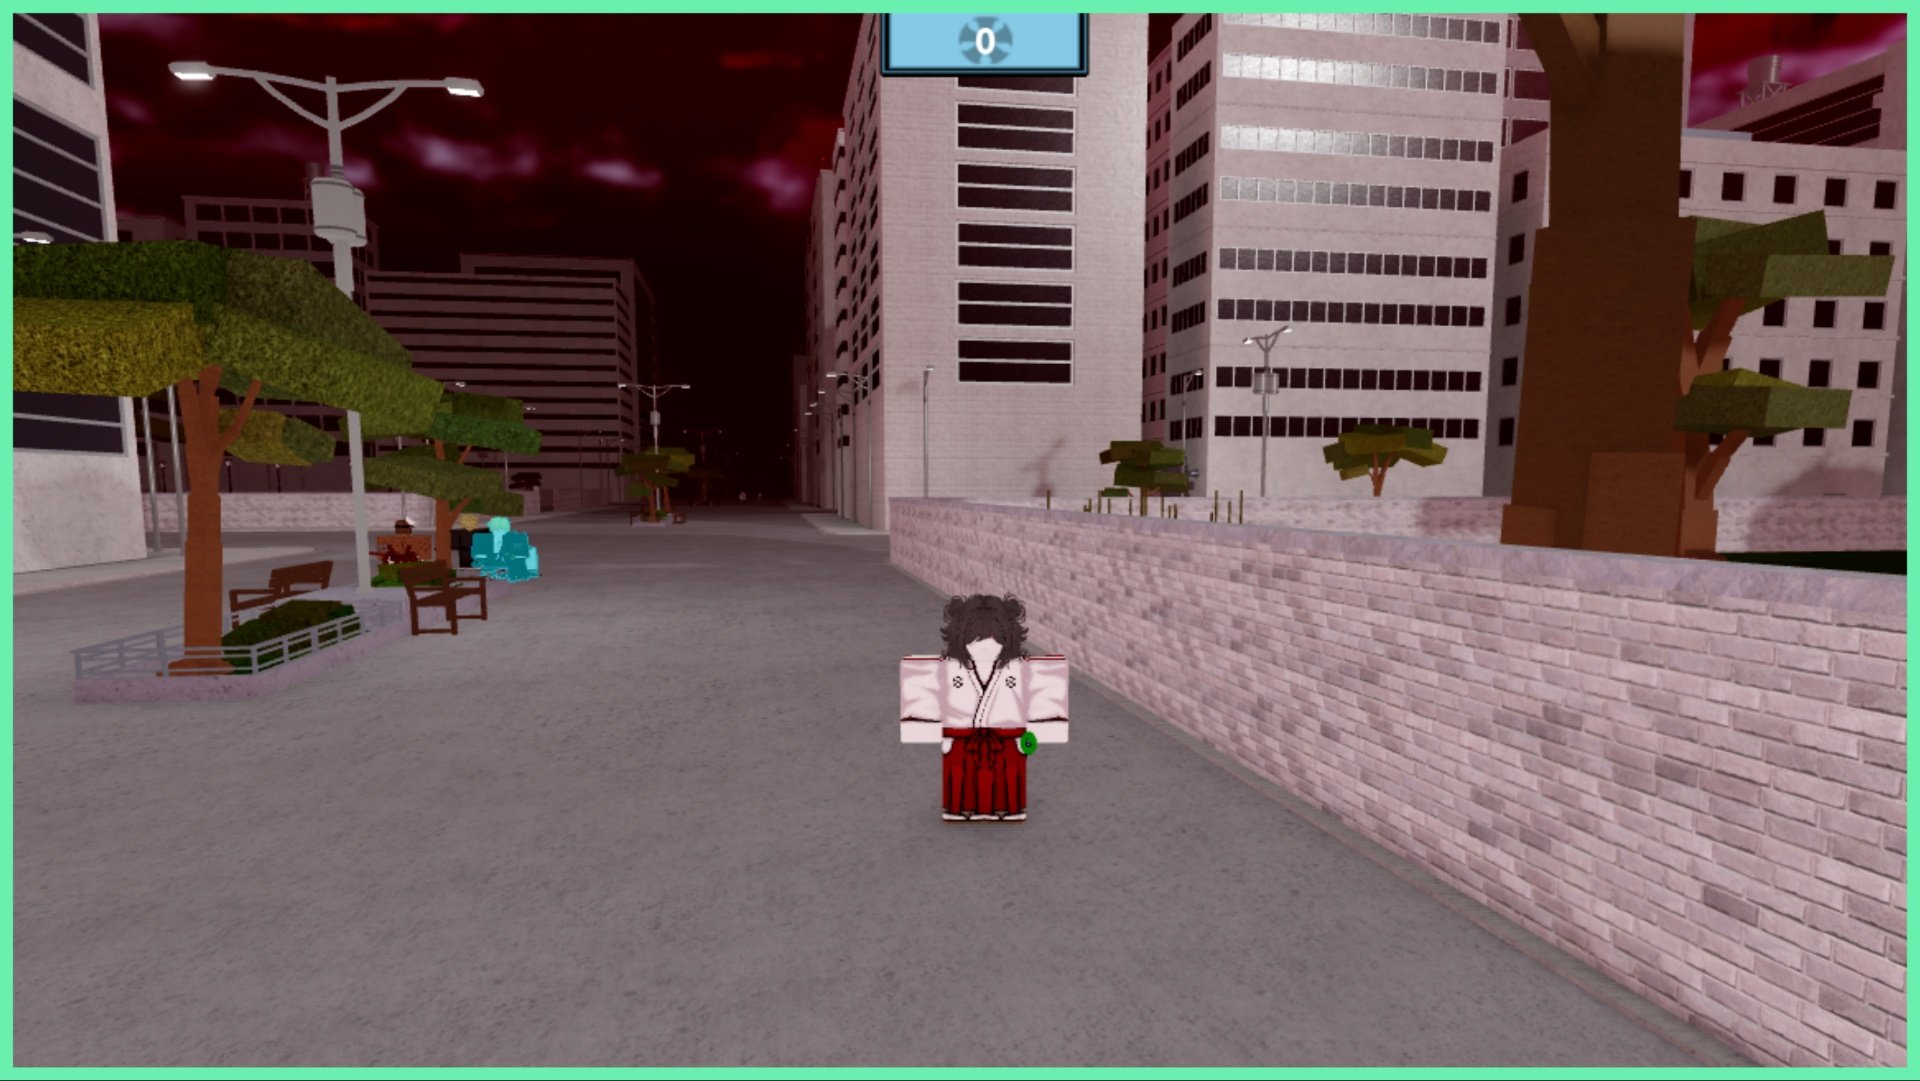 The image shows my avatar stood in white robes with red pants, behind her are a bunch of other players brawling between buildings and trees. The sky is tinted with a red filter